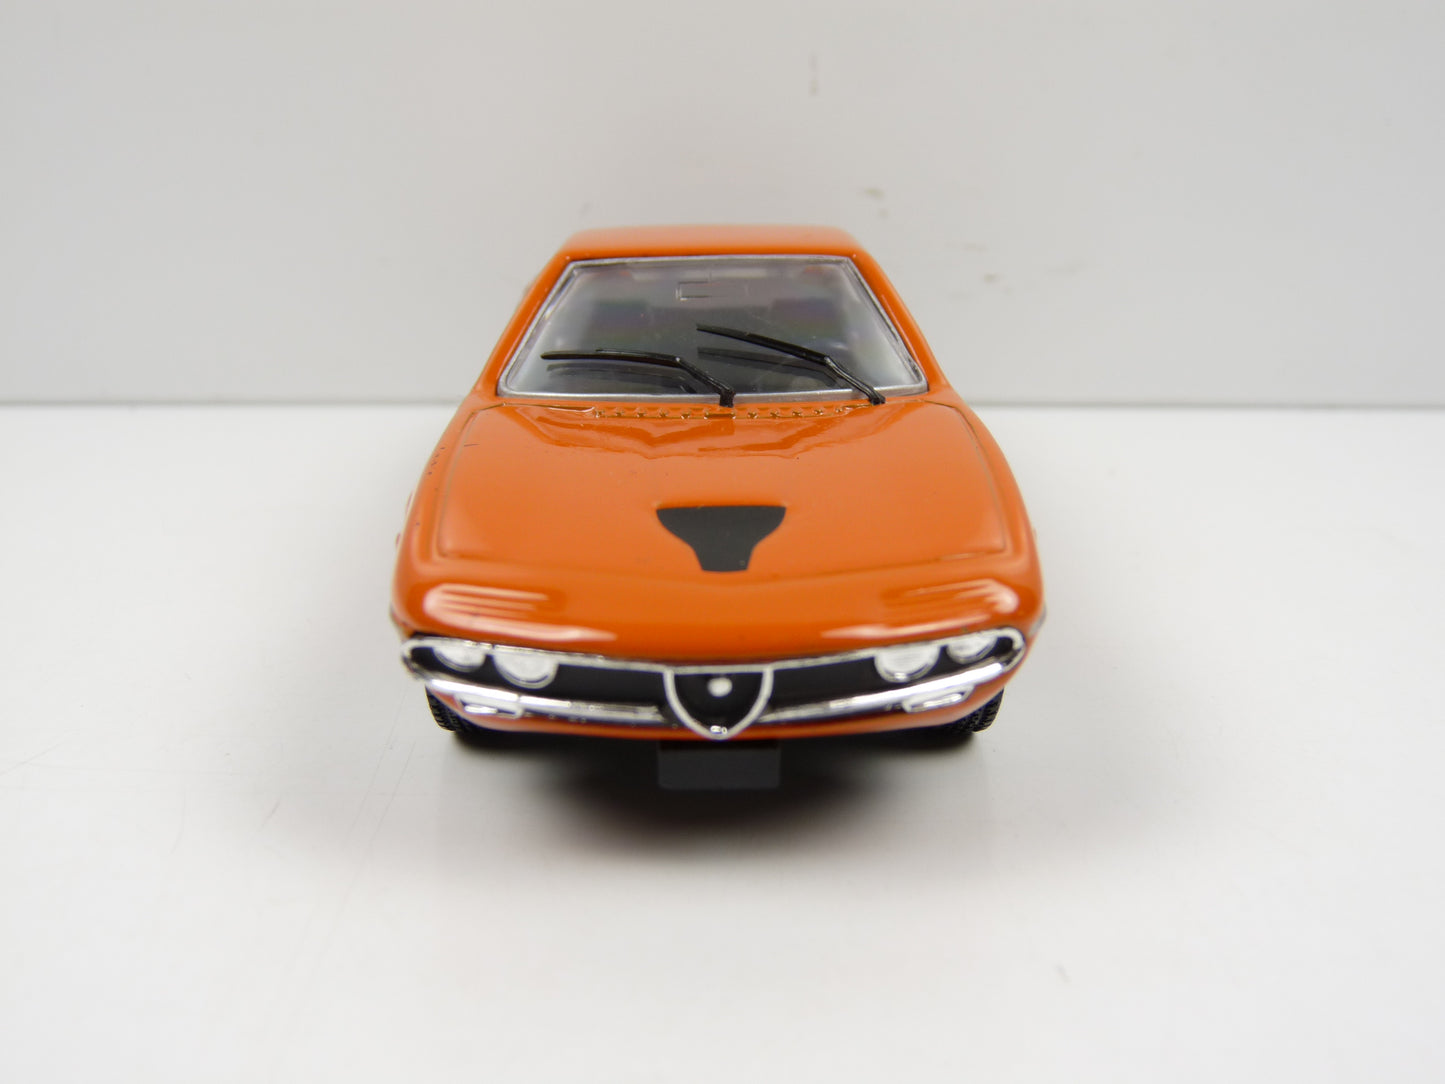 ITB0 Voiture 1/43 civile Italienne NOREV blister : ALFA ROMEO Montreal